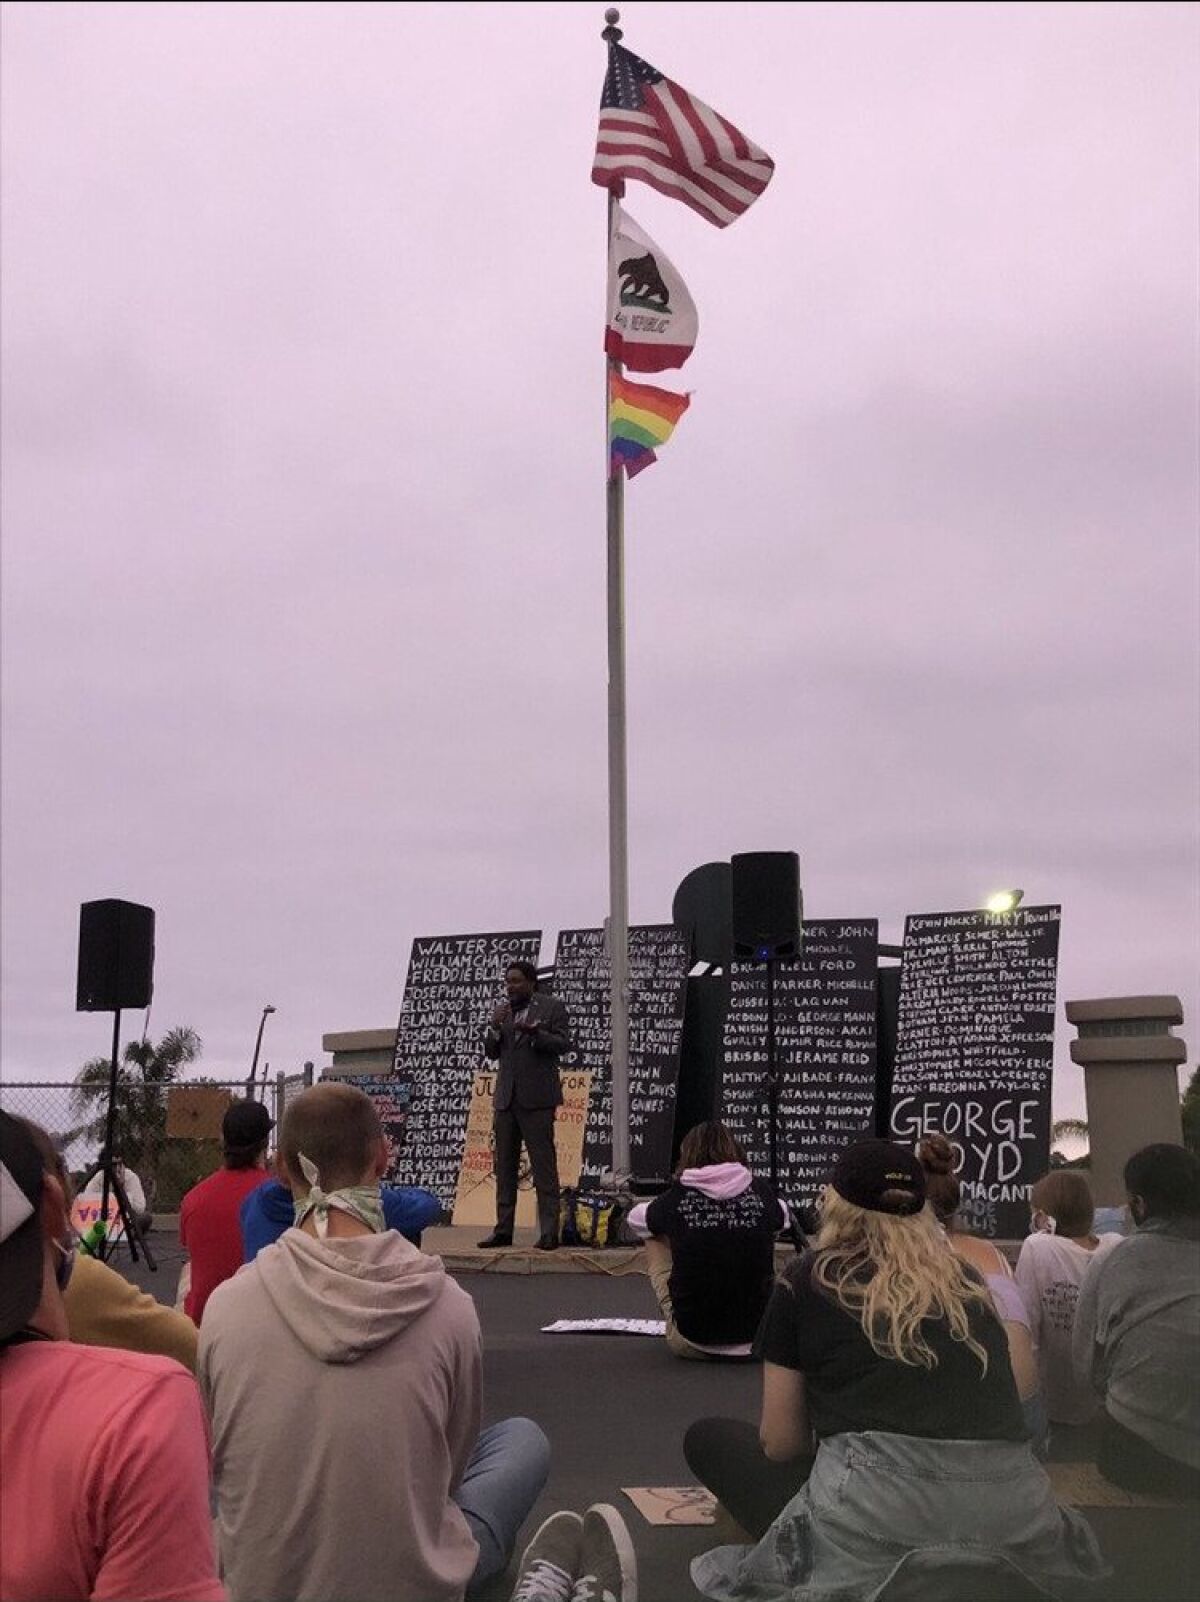 Encinitas 4 Equality started by holding gatherings at Cardiff Kook.